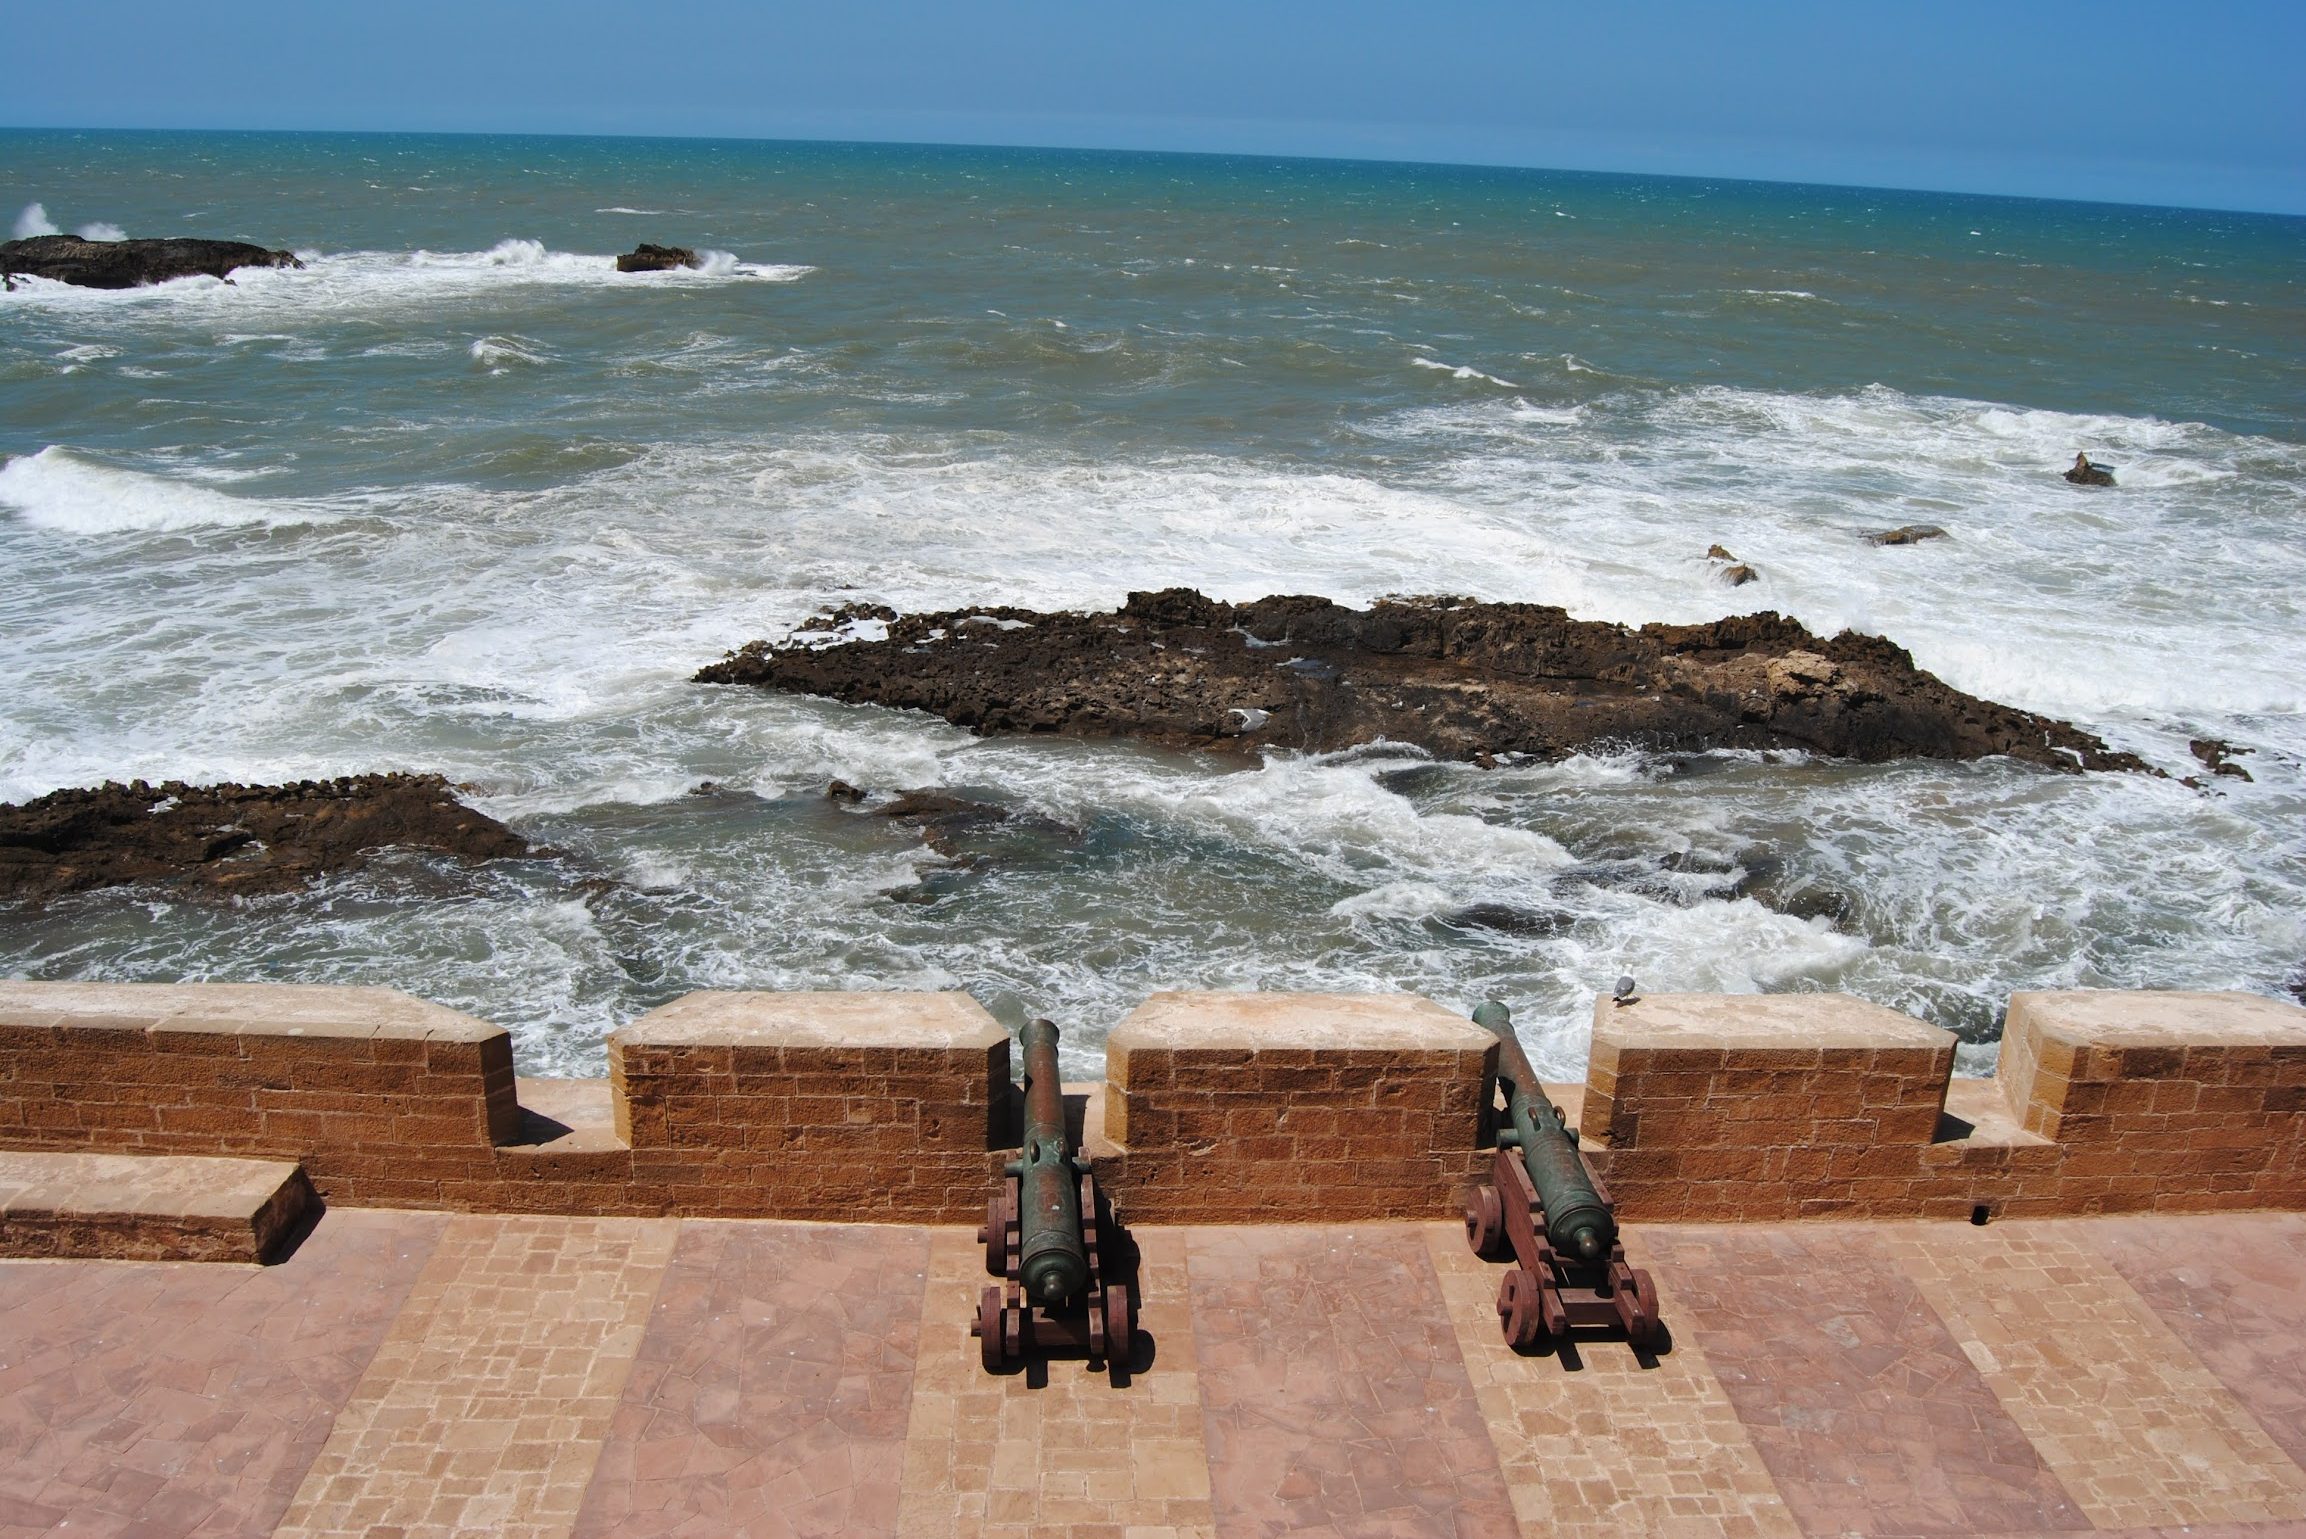 Canons on a city wall pointing towards the ocean